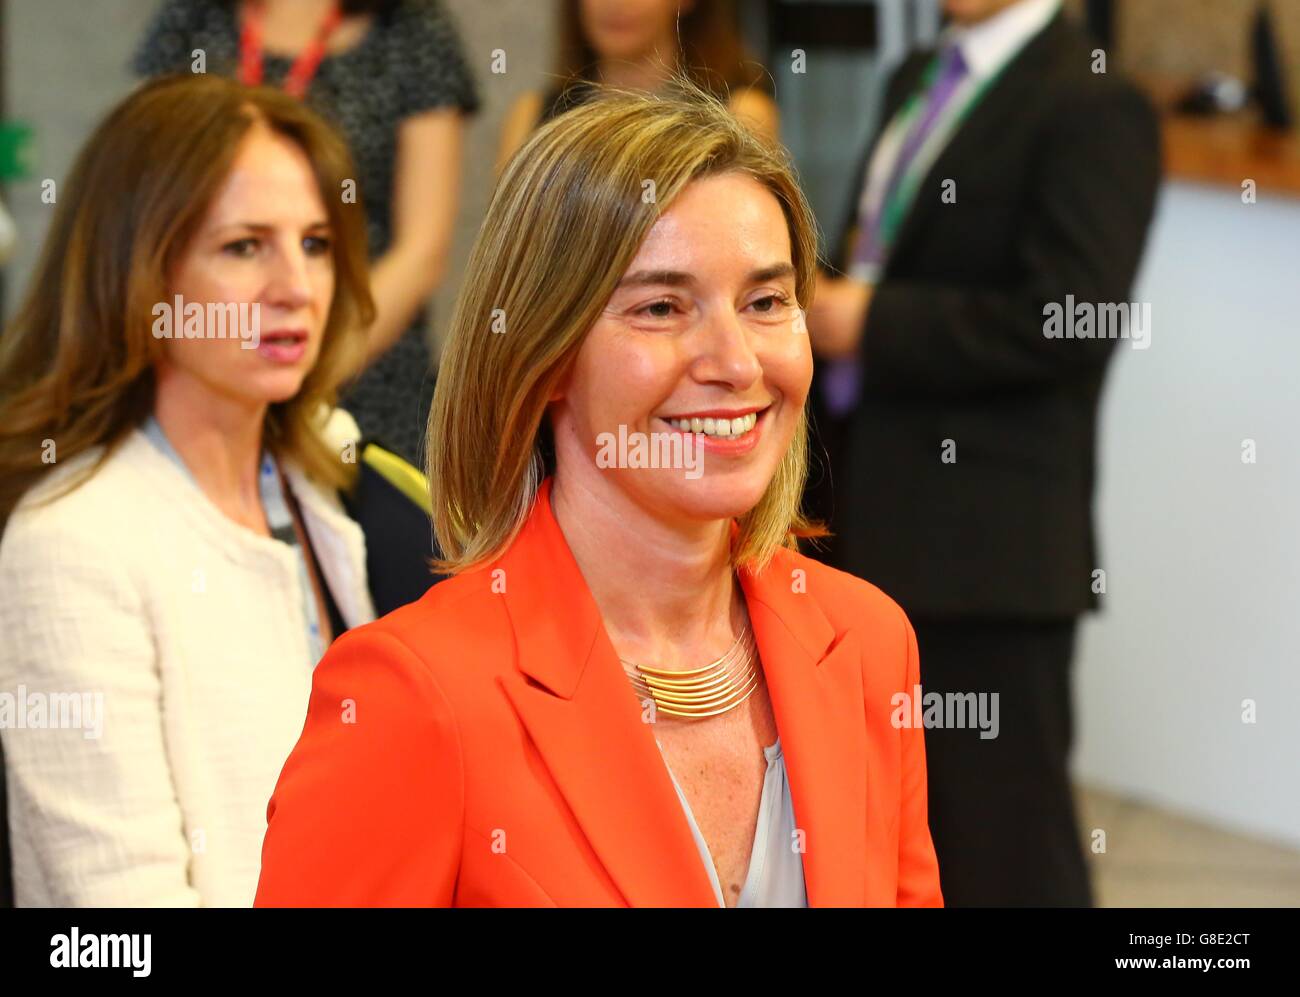 Brussels. 28th June, 2016. European Union High representative for Foreign Affairs and Security Policy Federica Mogherini arrives for the EU summit meeting at Brussels, Belgium on June 28, 2016. © Gong Bing/Xinhua/Alamy Live News Stock Photo